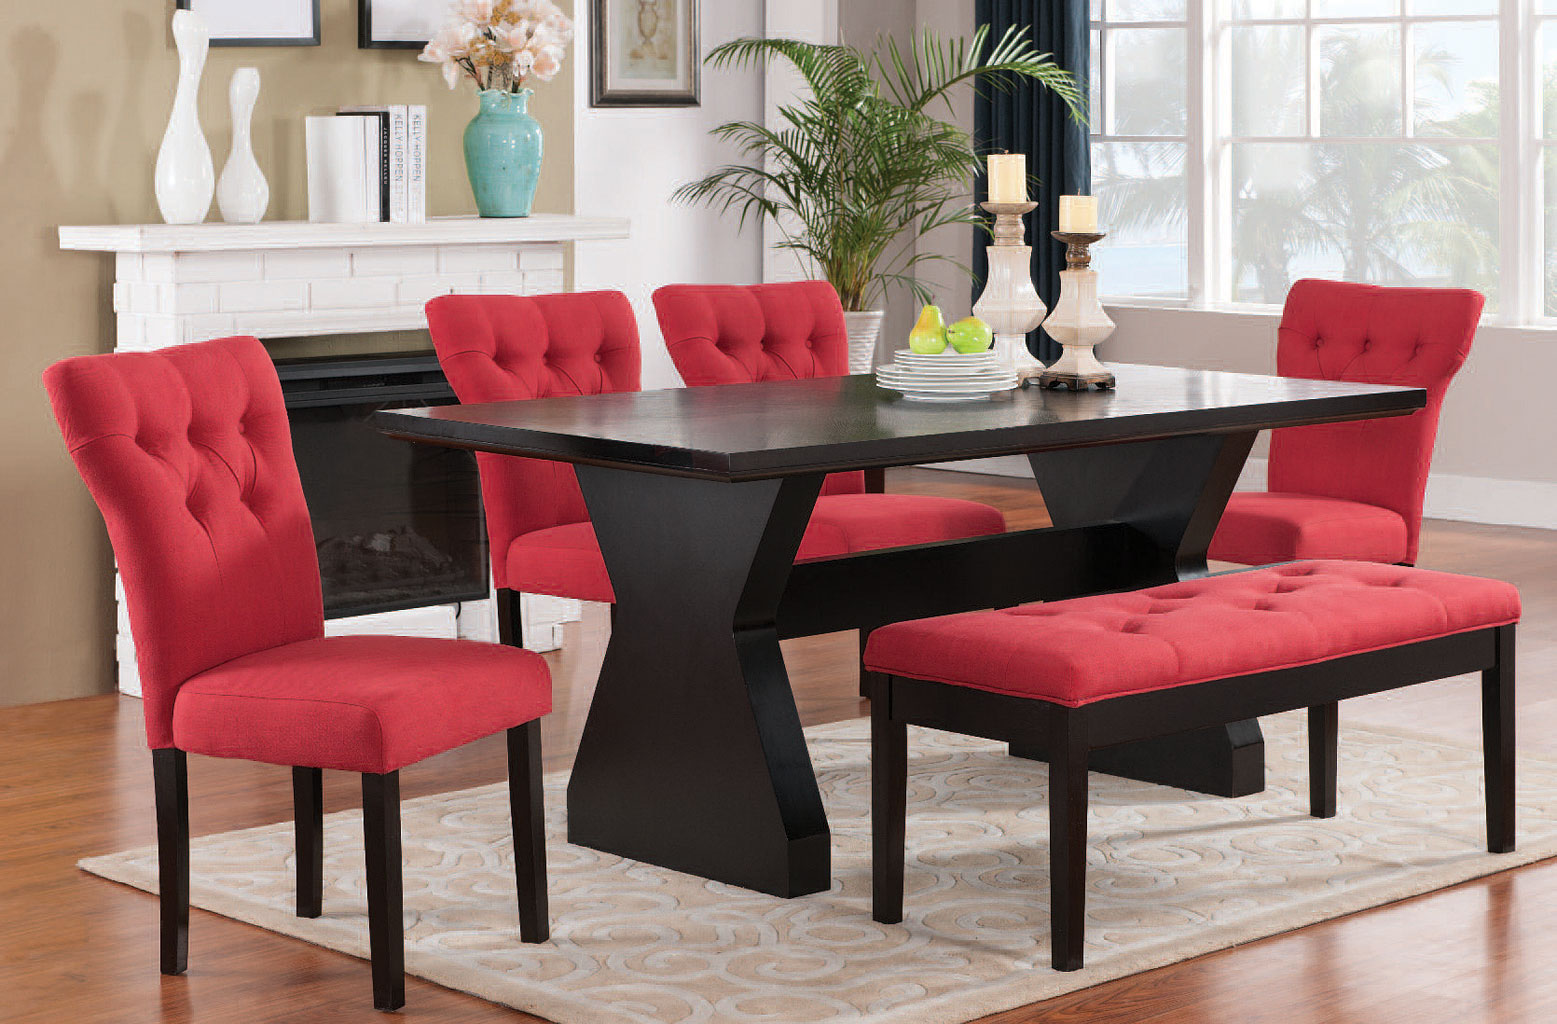 Red Dining Room Table And Chairs